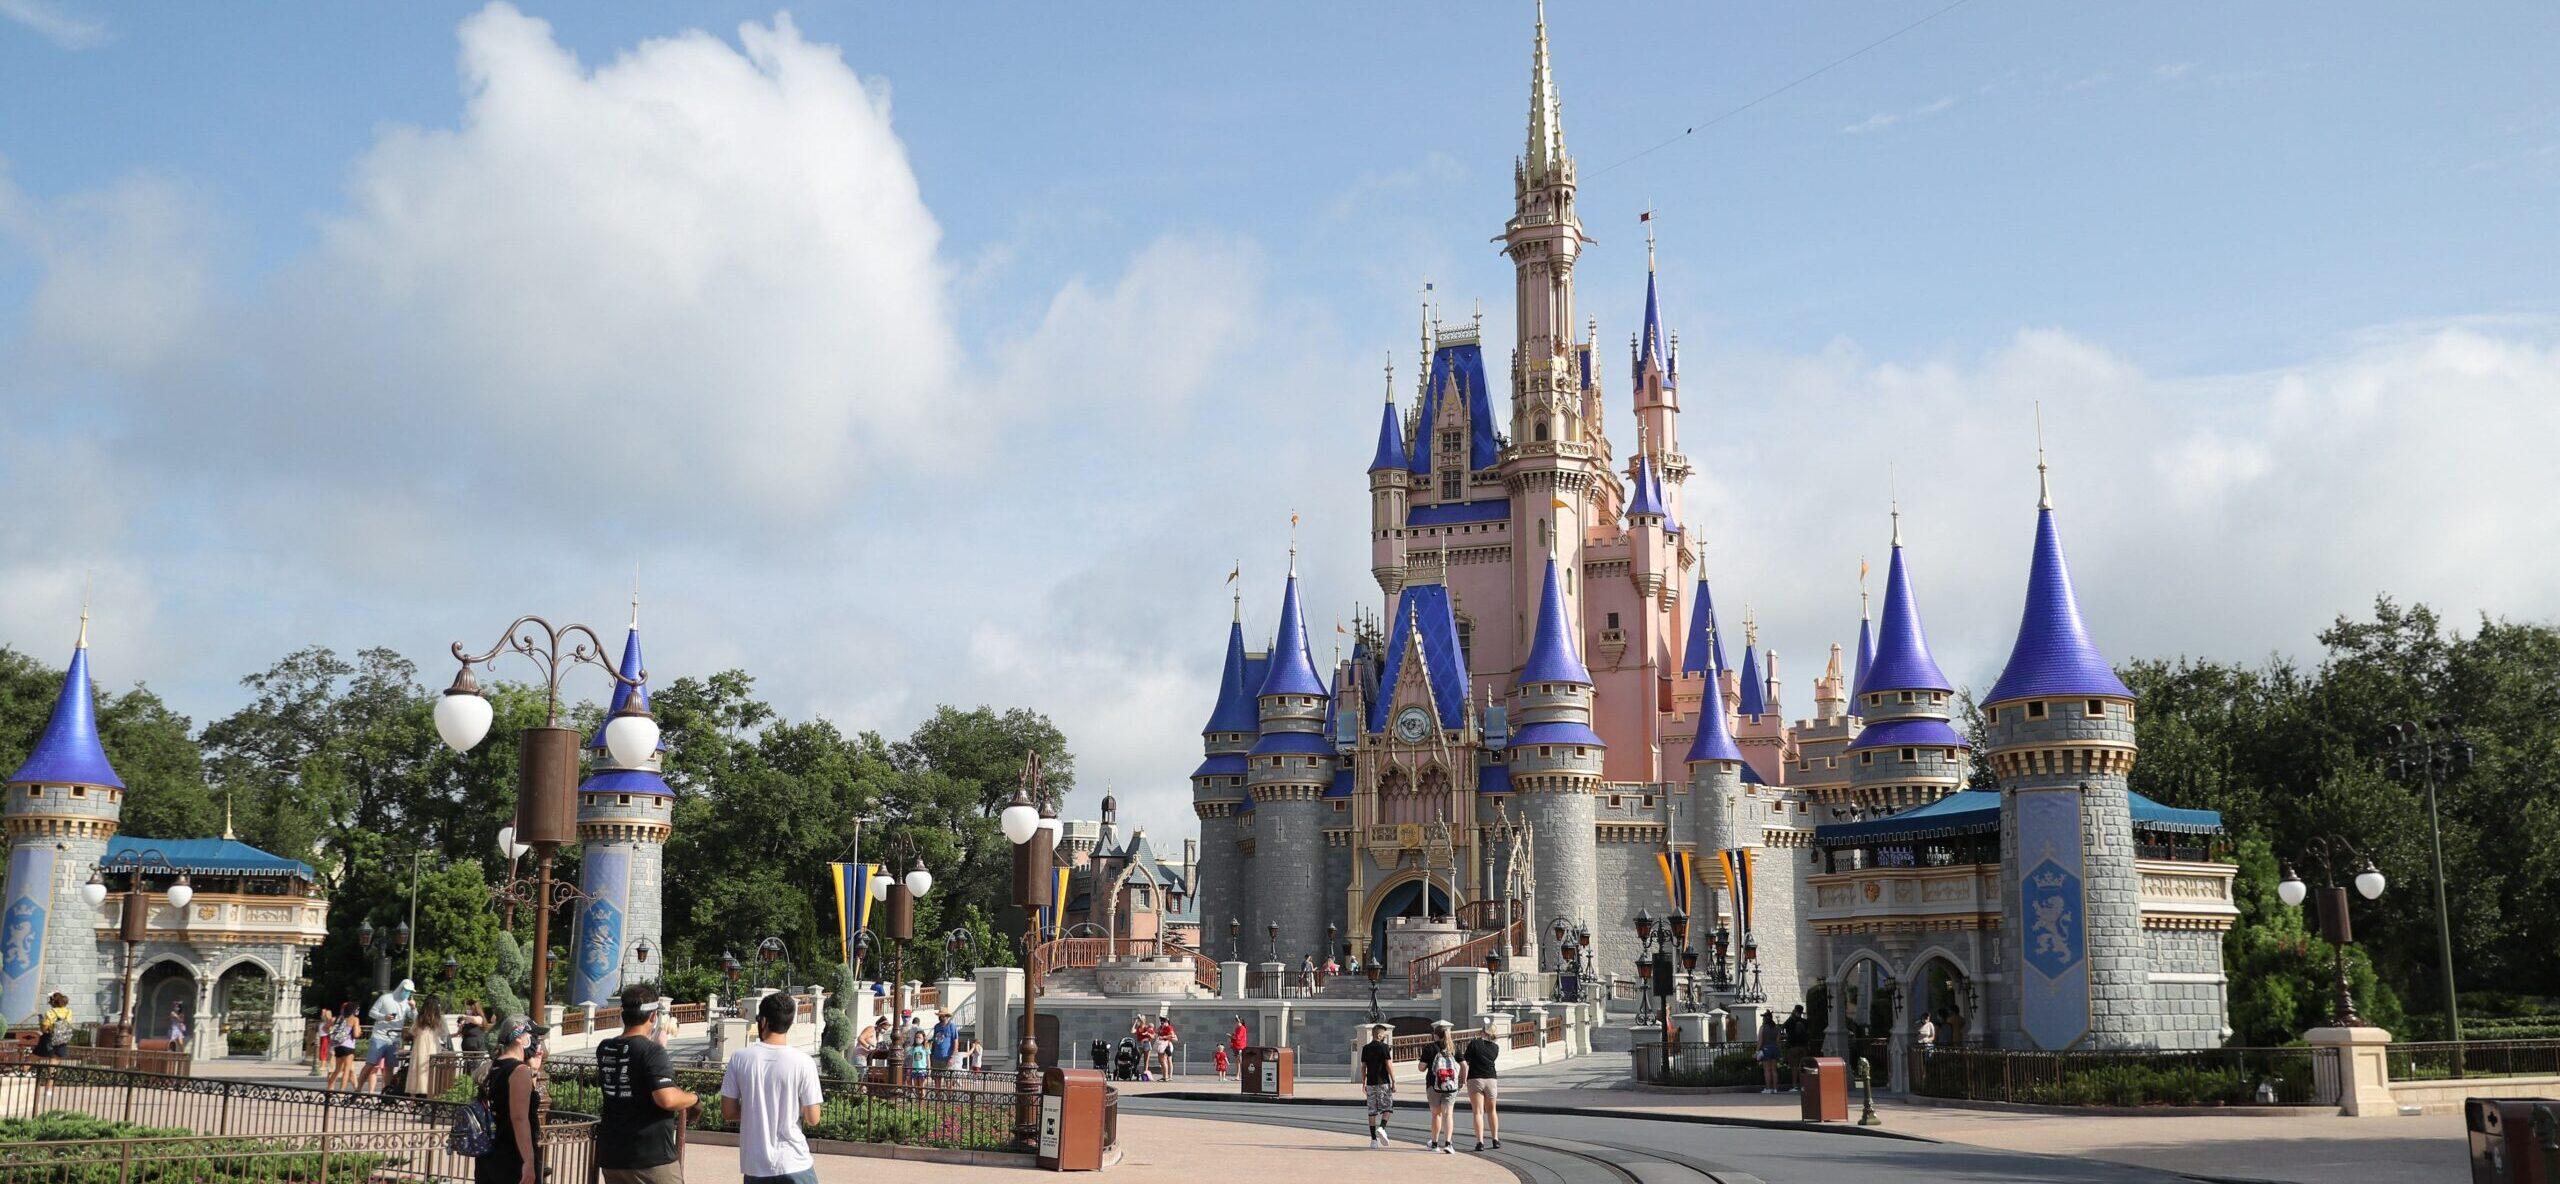 Multiple Injuries Reported At Disney World, Universal Orlando For Q1 2023